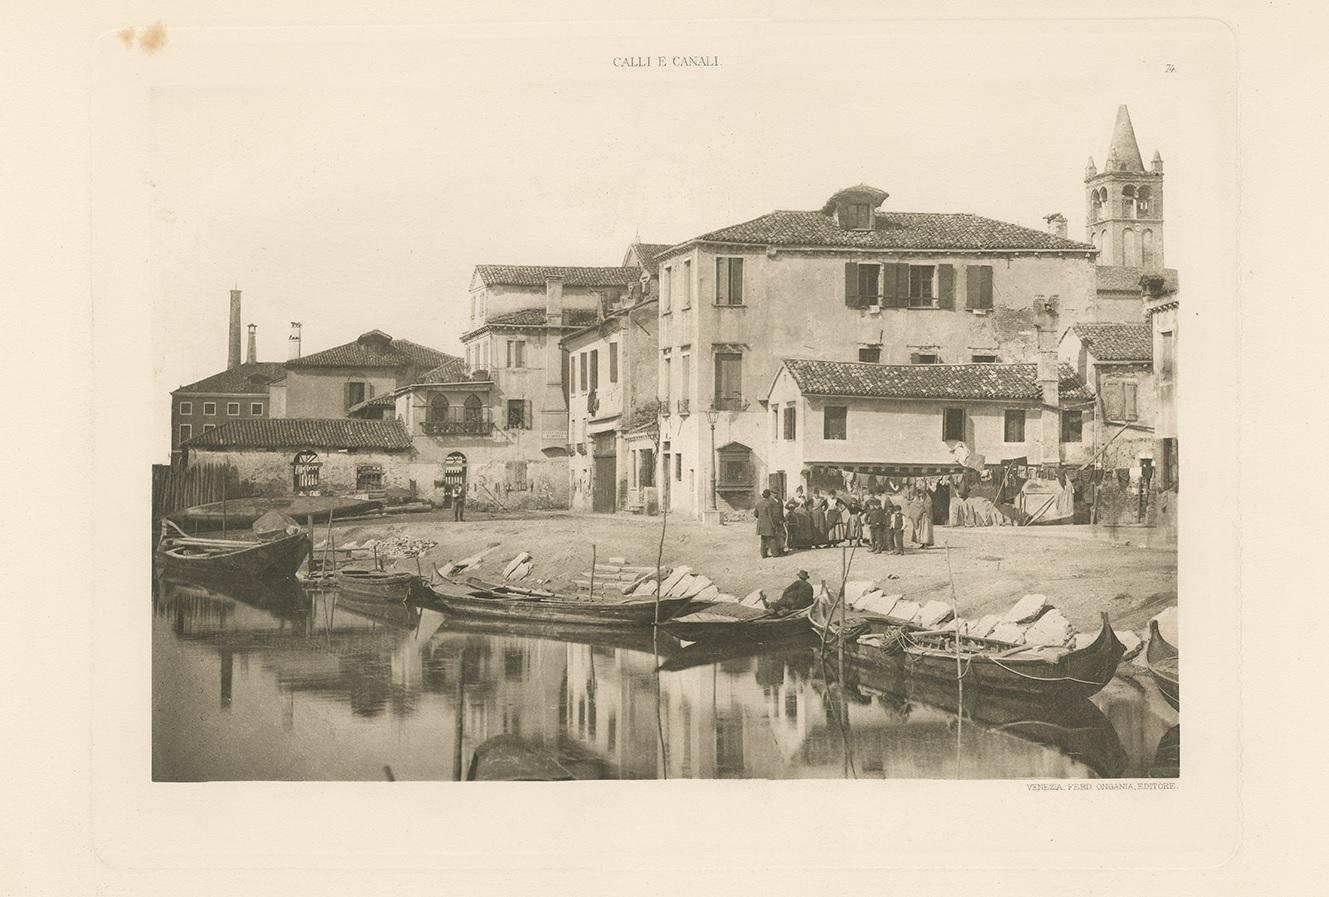 Photogravure of St. Martha's Square from the Campo di Marte canal in Venice, Italy. A church buolt in the 14th century and dedicated to S. Martha once stood in the immediate neighbourhood. However, this remote and populous quarter of the city lost